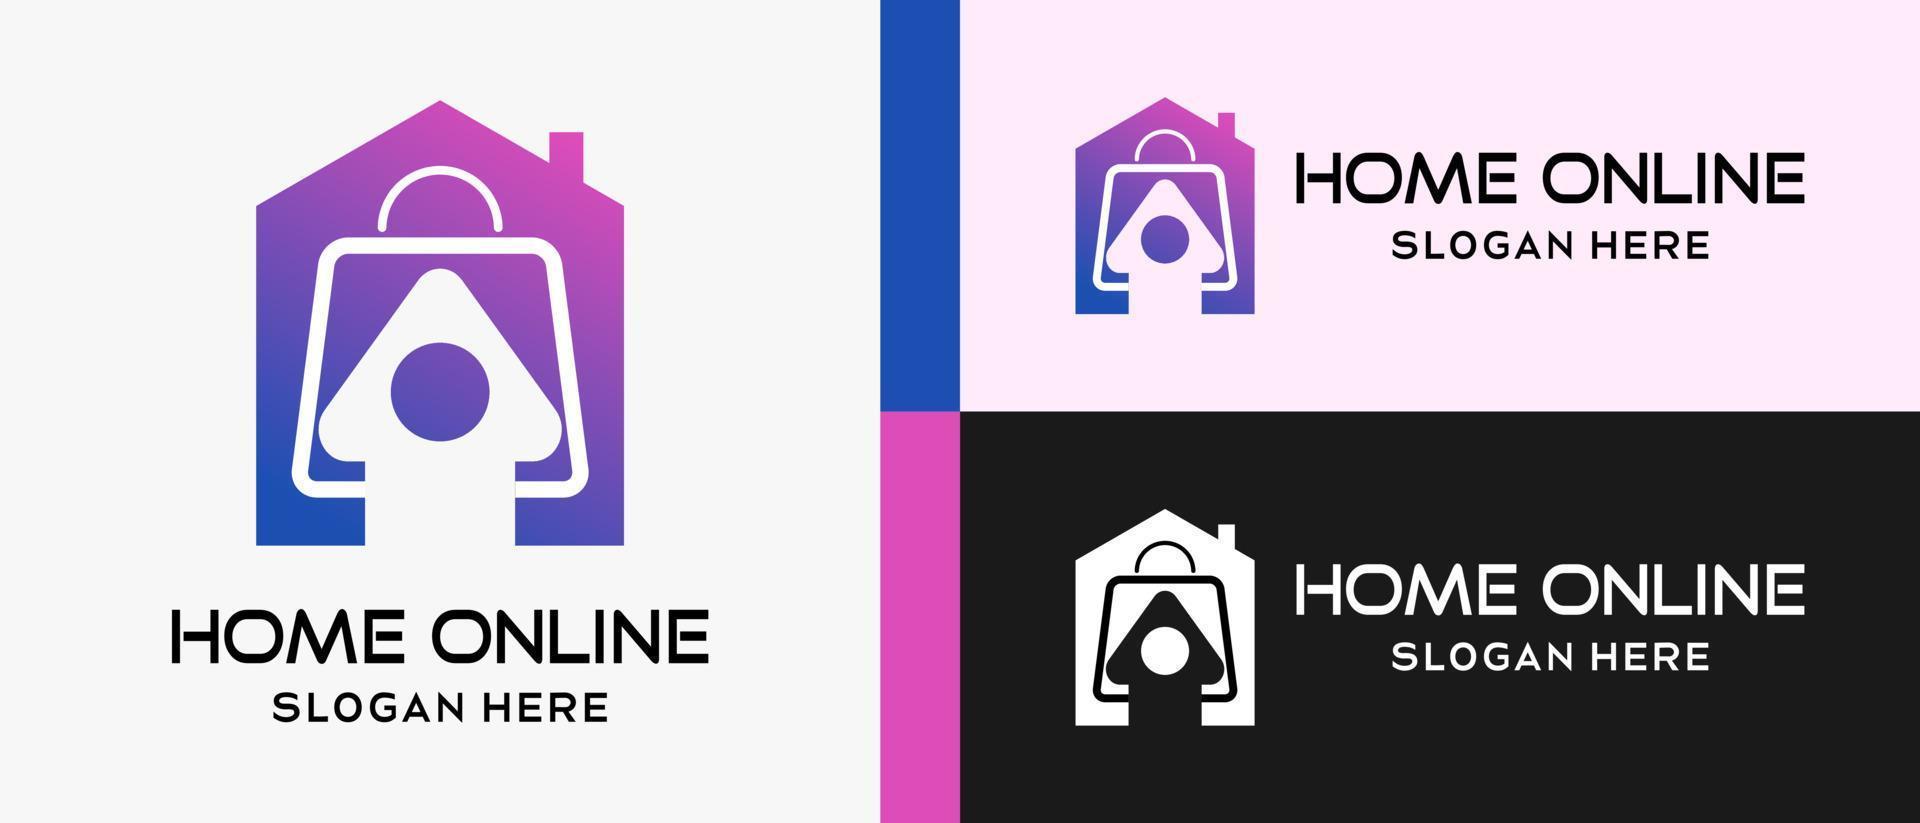 online shopping or online shop logo design template with shopping bag elements, cursor icon and house icon in creative concept. premium online shop logo illustration vector